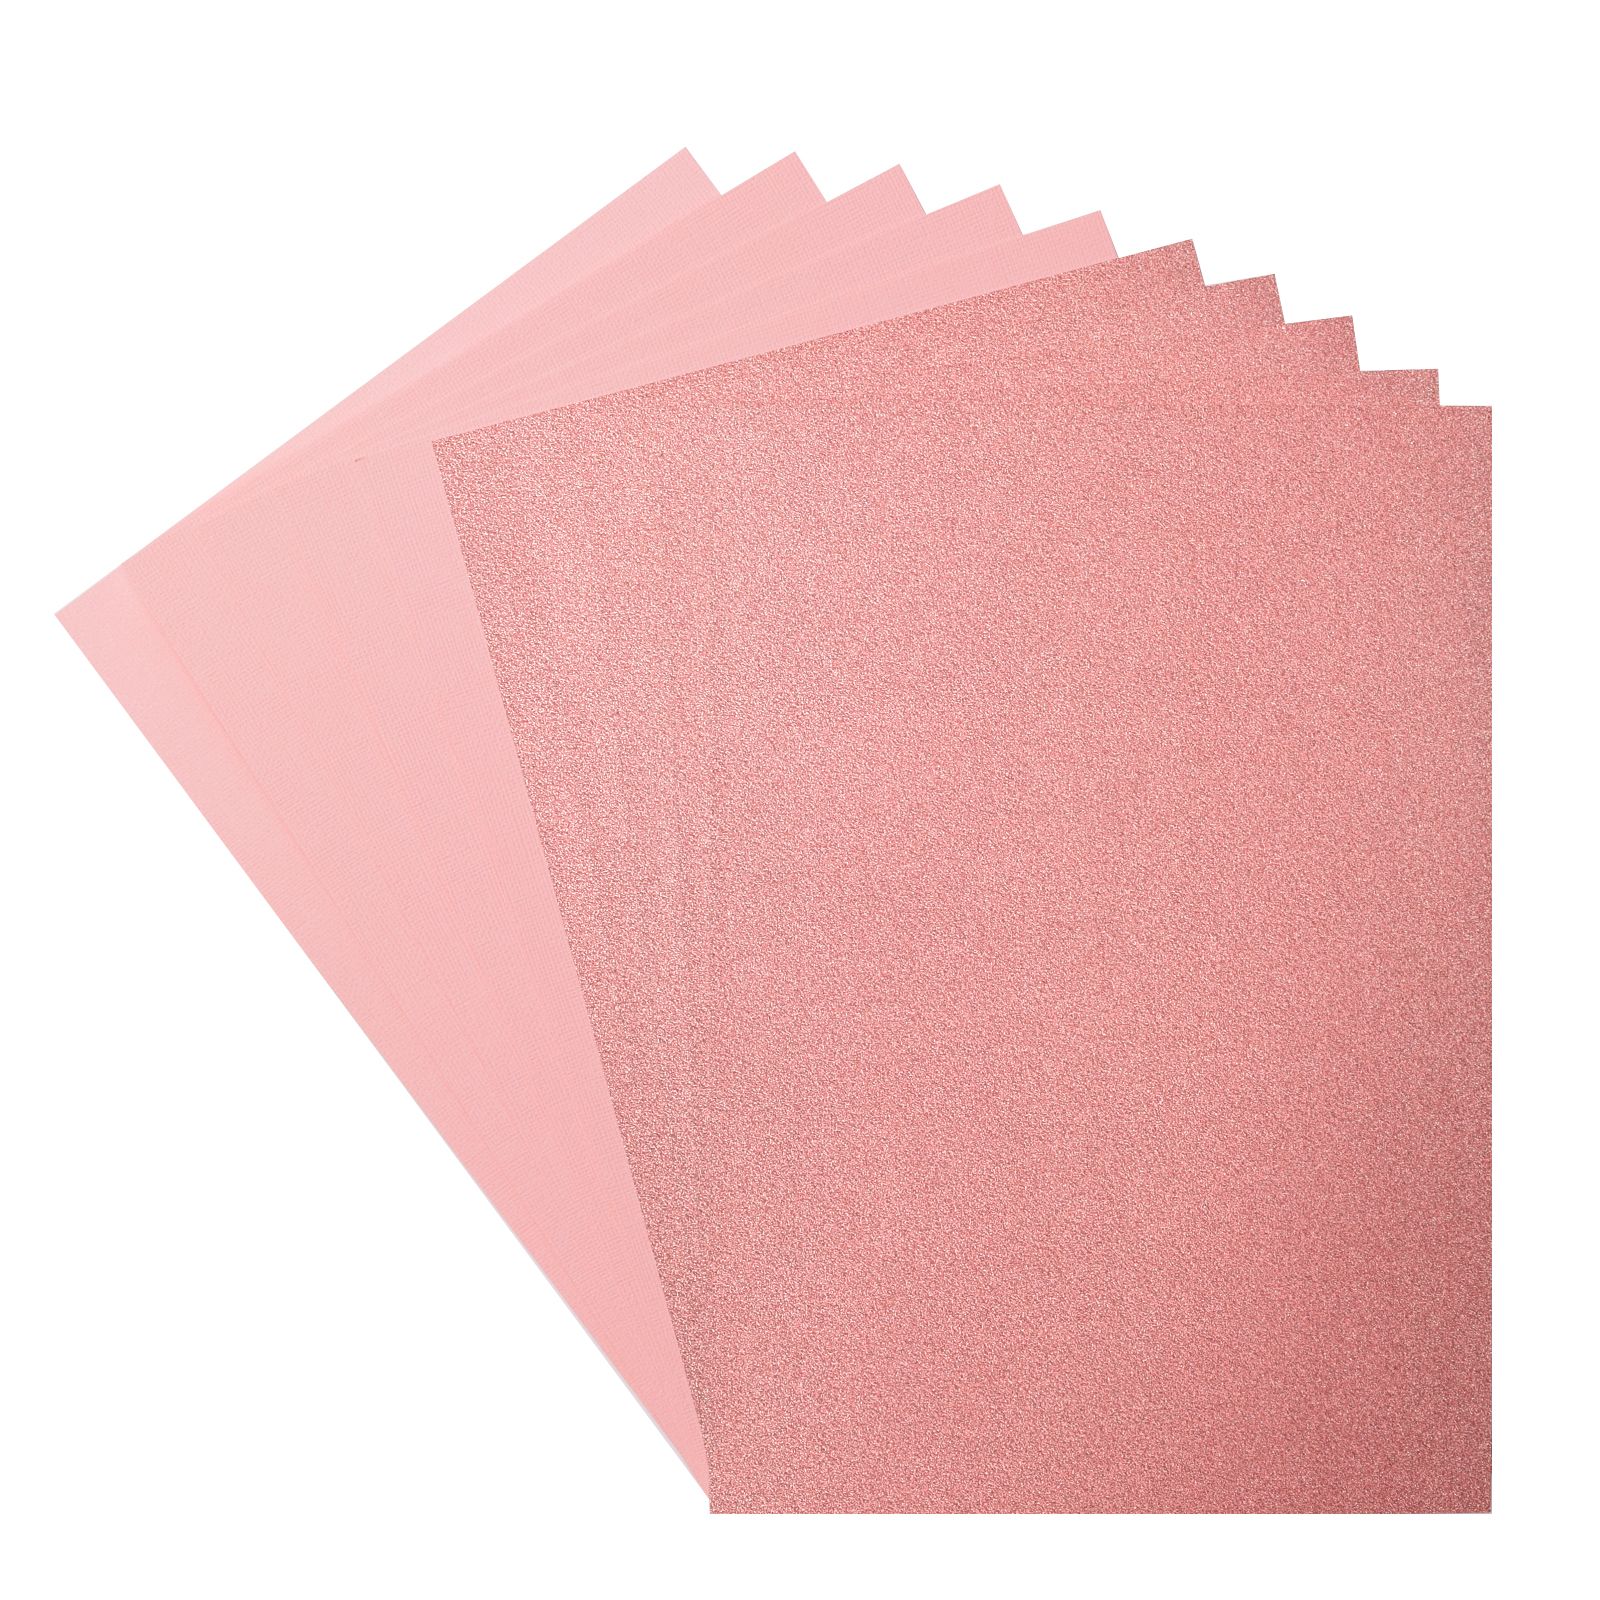 Florence • Glitter Paper and Cardstock Set 216g A4 10x Rose/Rose